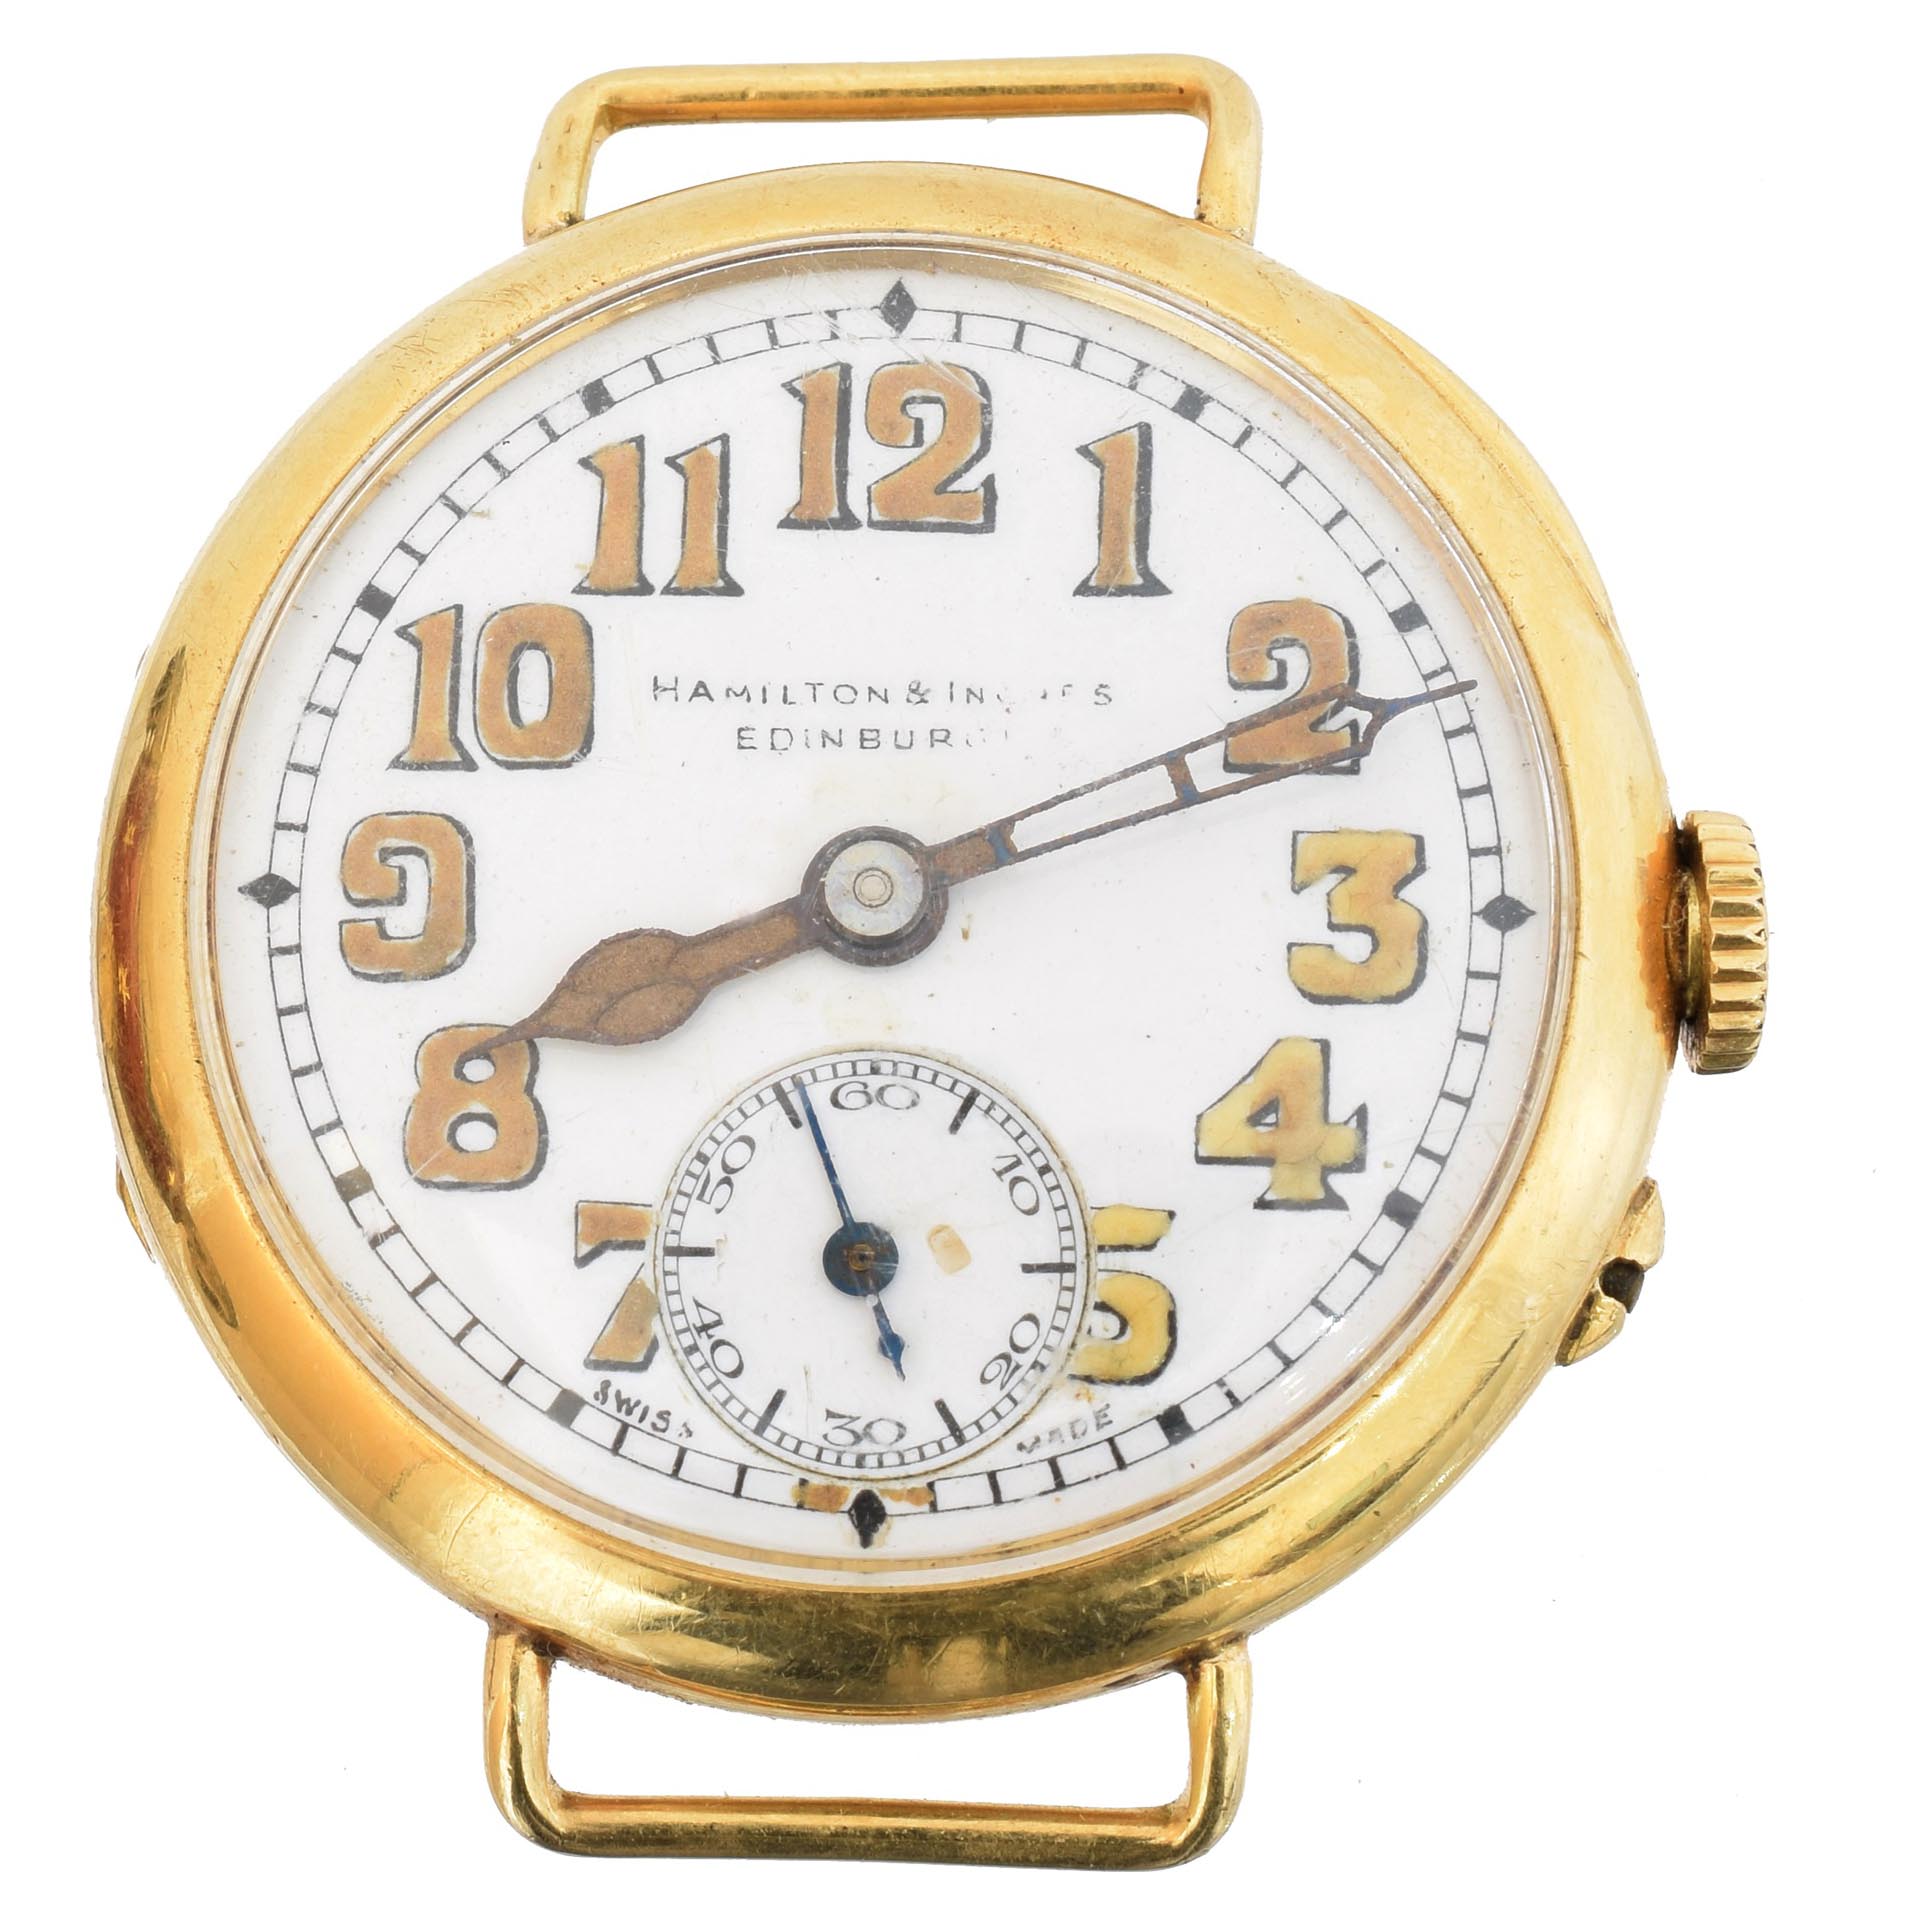 Hamilton & Inches Jewellery Watches auction